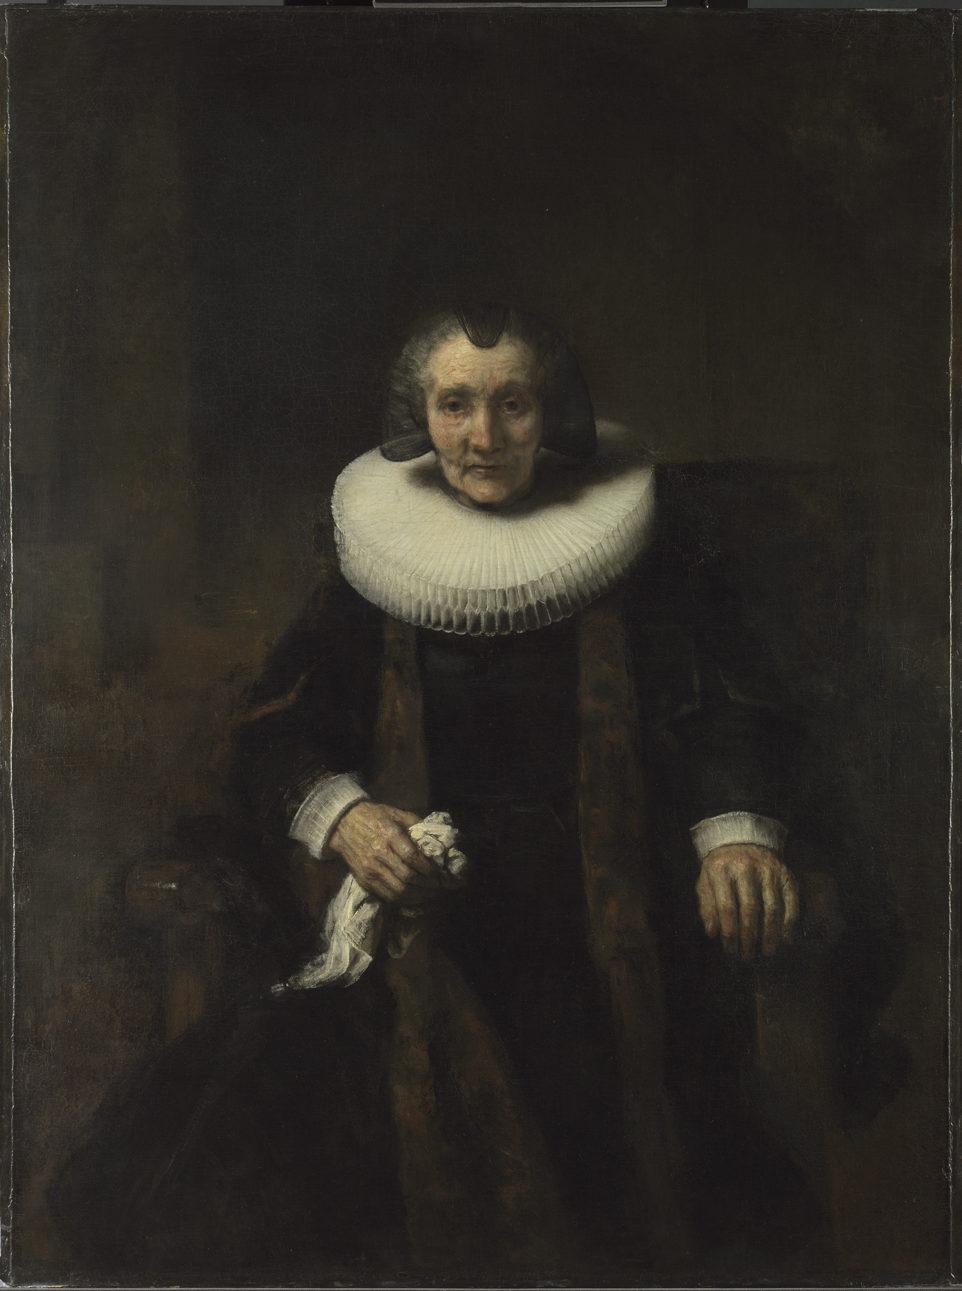 With bold brushwork Rembrandt suggests the aged character of her skin, not through definition of wrinkles but through the irregularities of its surface.